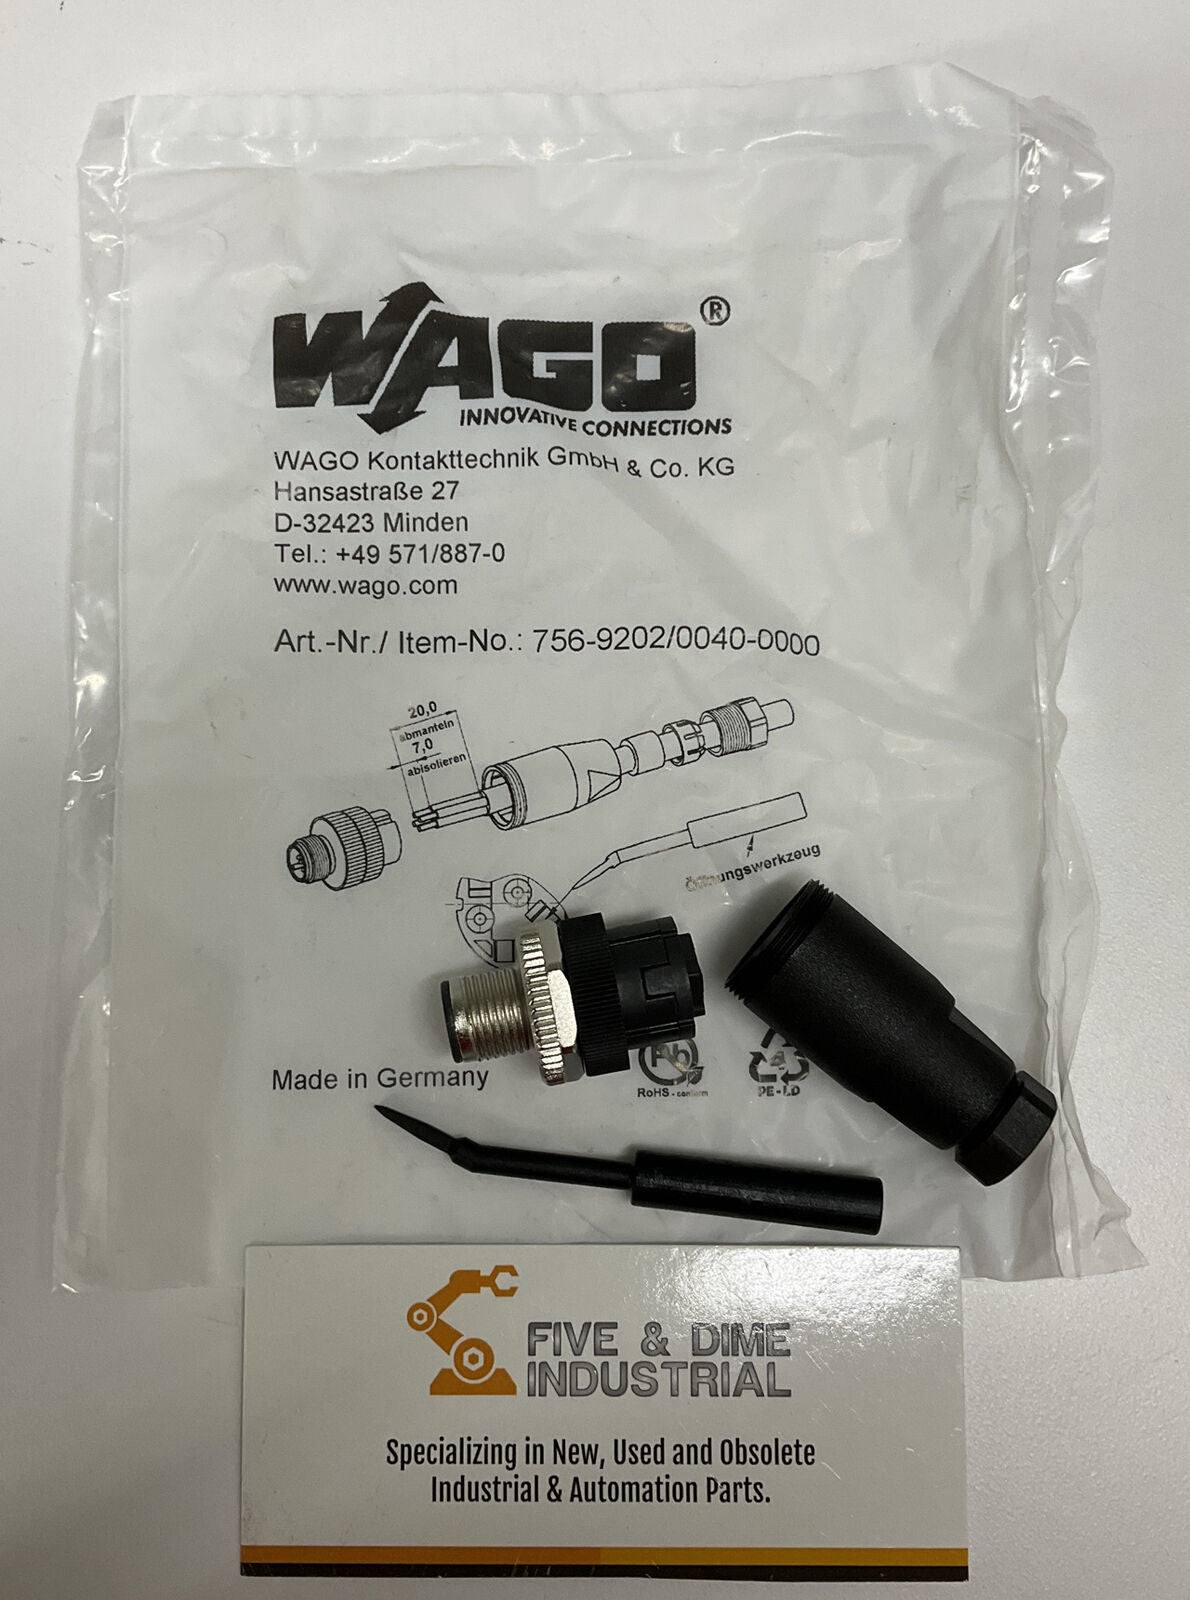 Wago 756-9202 4-pole, M12 Fitted Pluggable Connector 756-9202/0040-0000 (CL355)